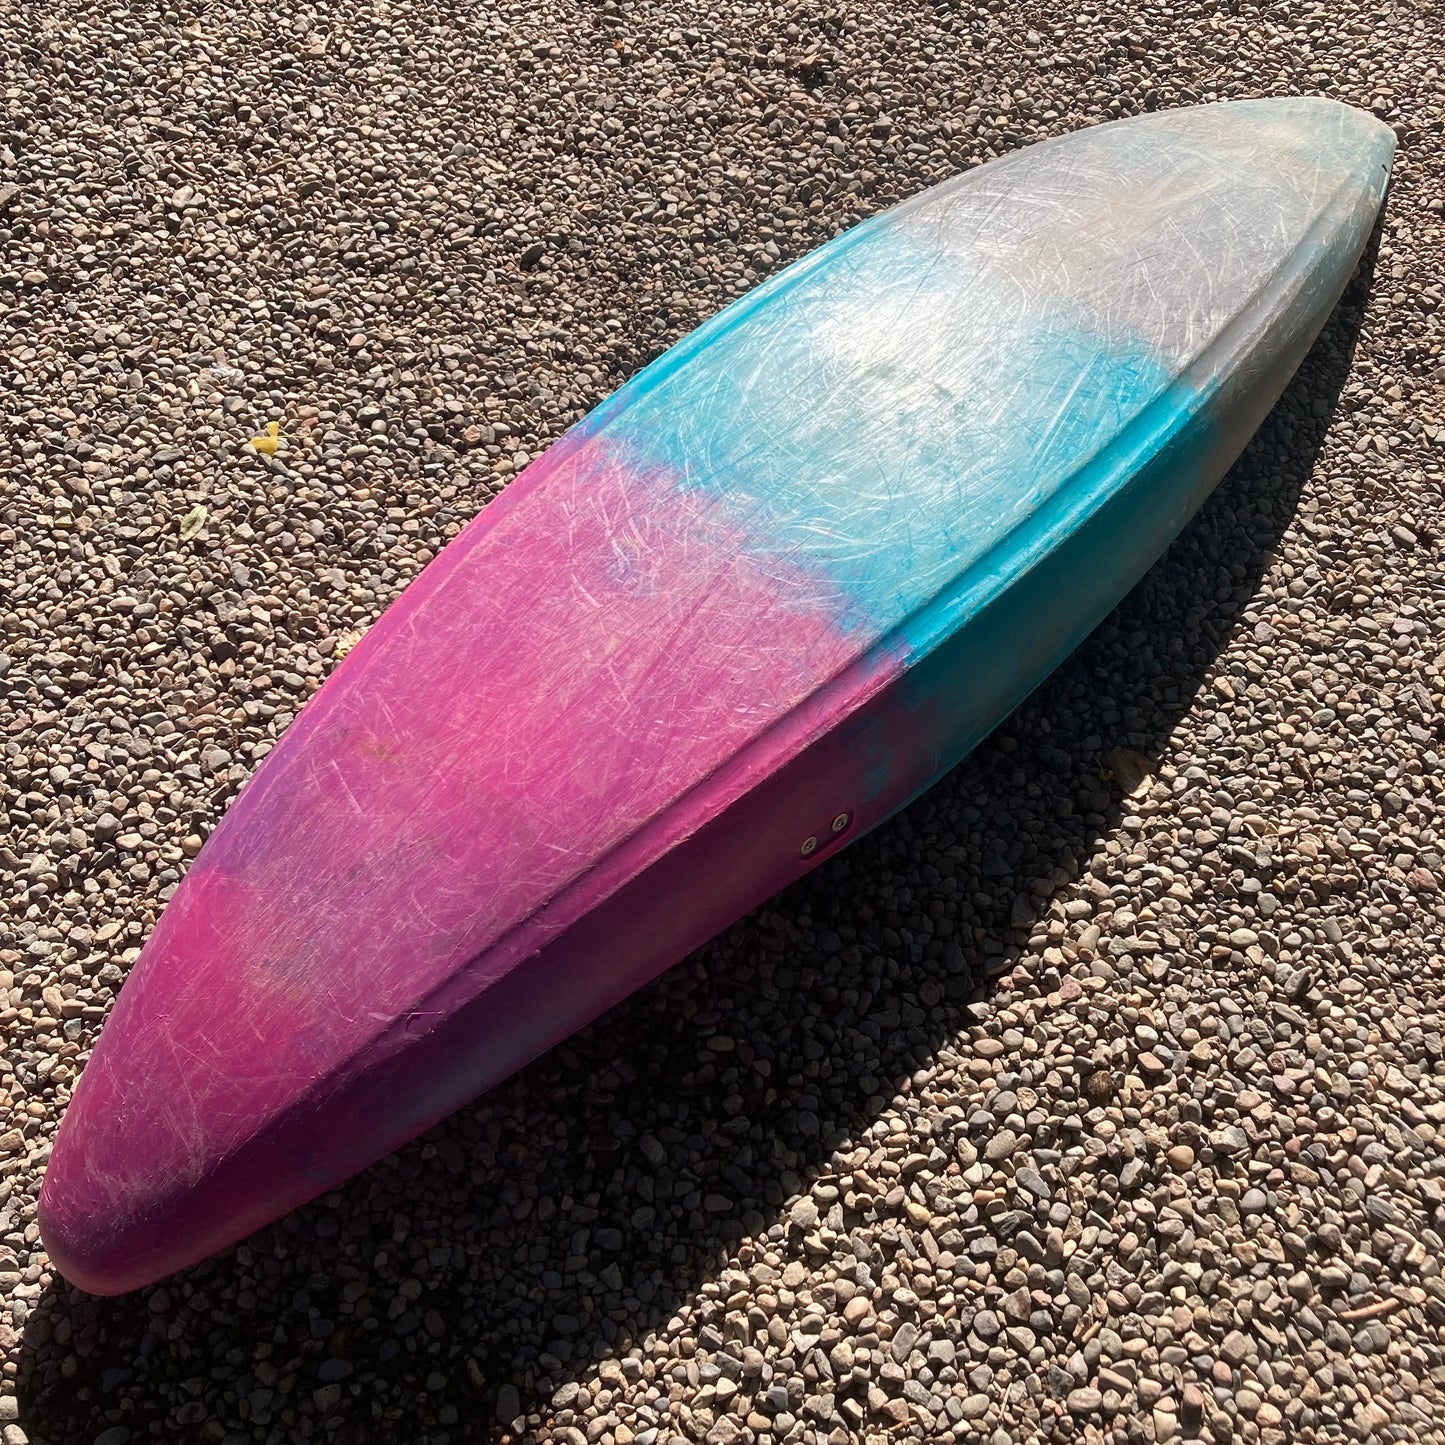 A Dagger Demo Rewind SM surfboard laying on the ground in a gravel area.